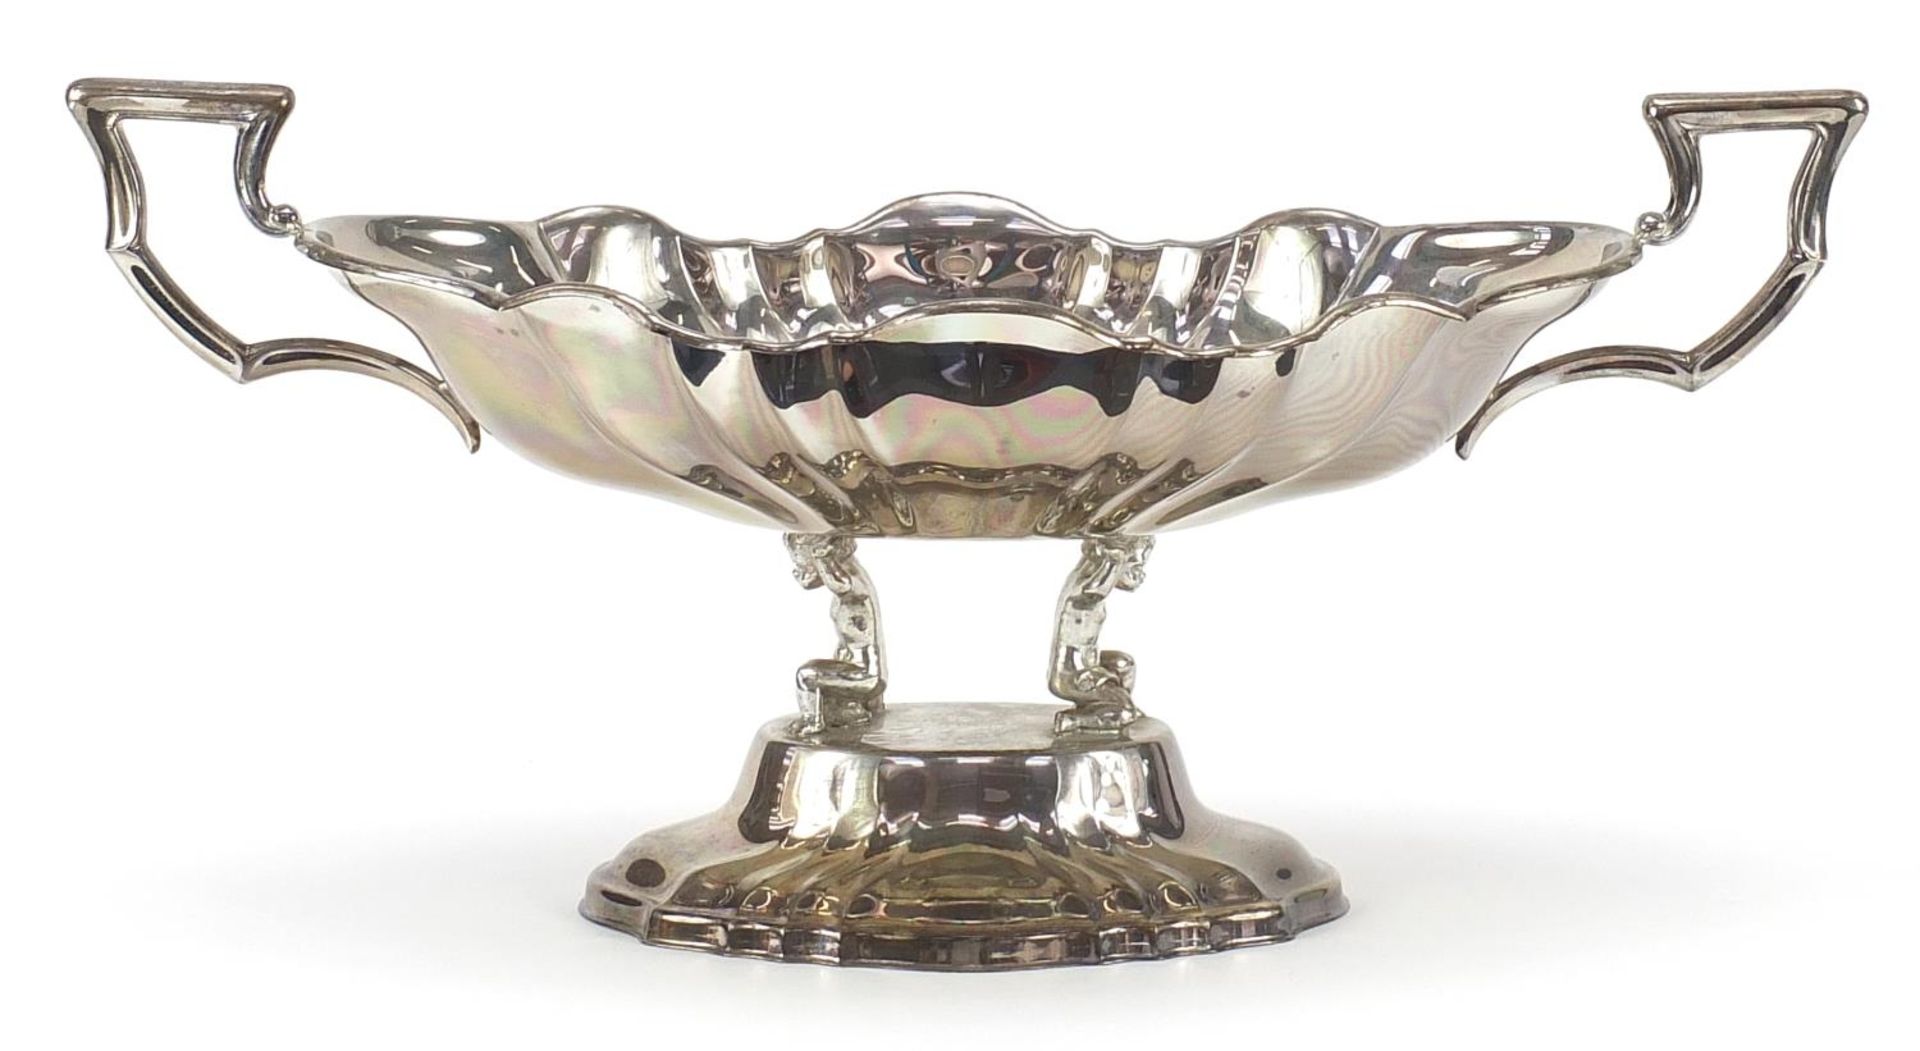 Large silver plated centrepiece with scalloped edges and handles on the end, supported by two